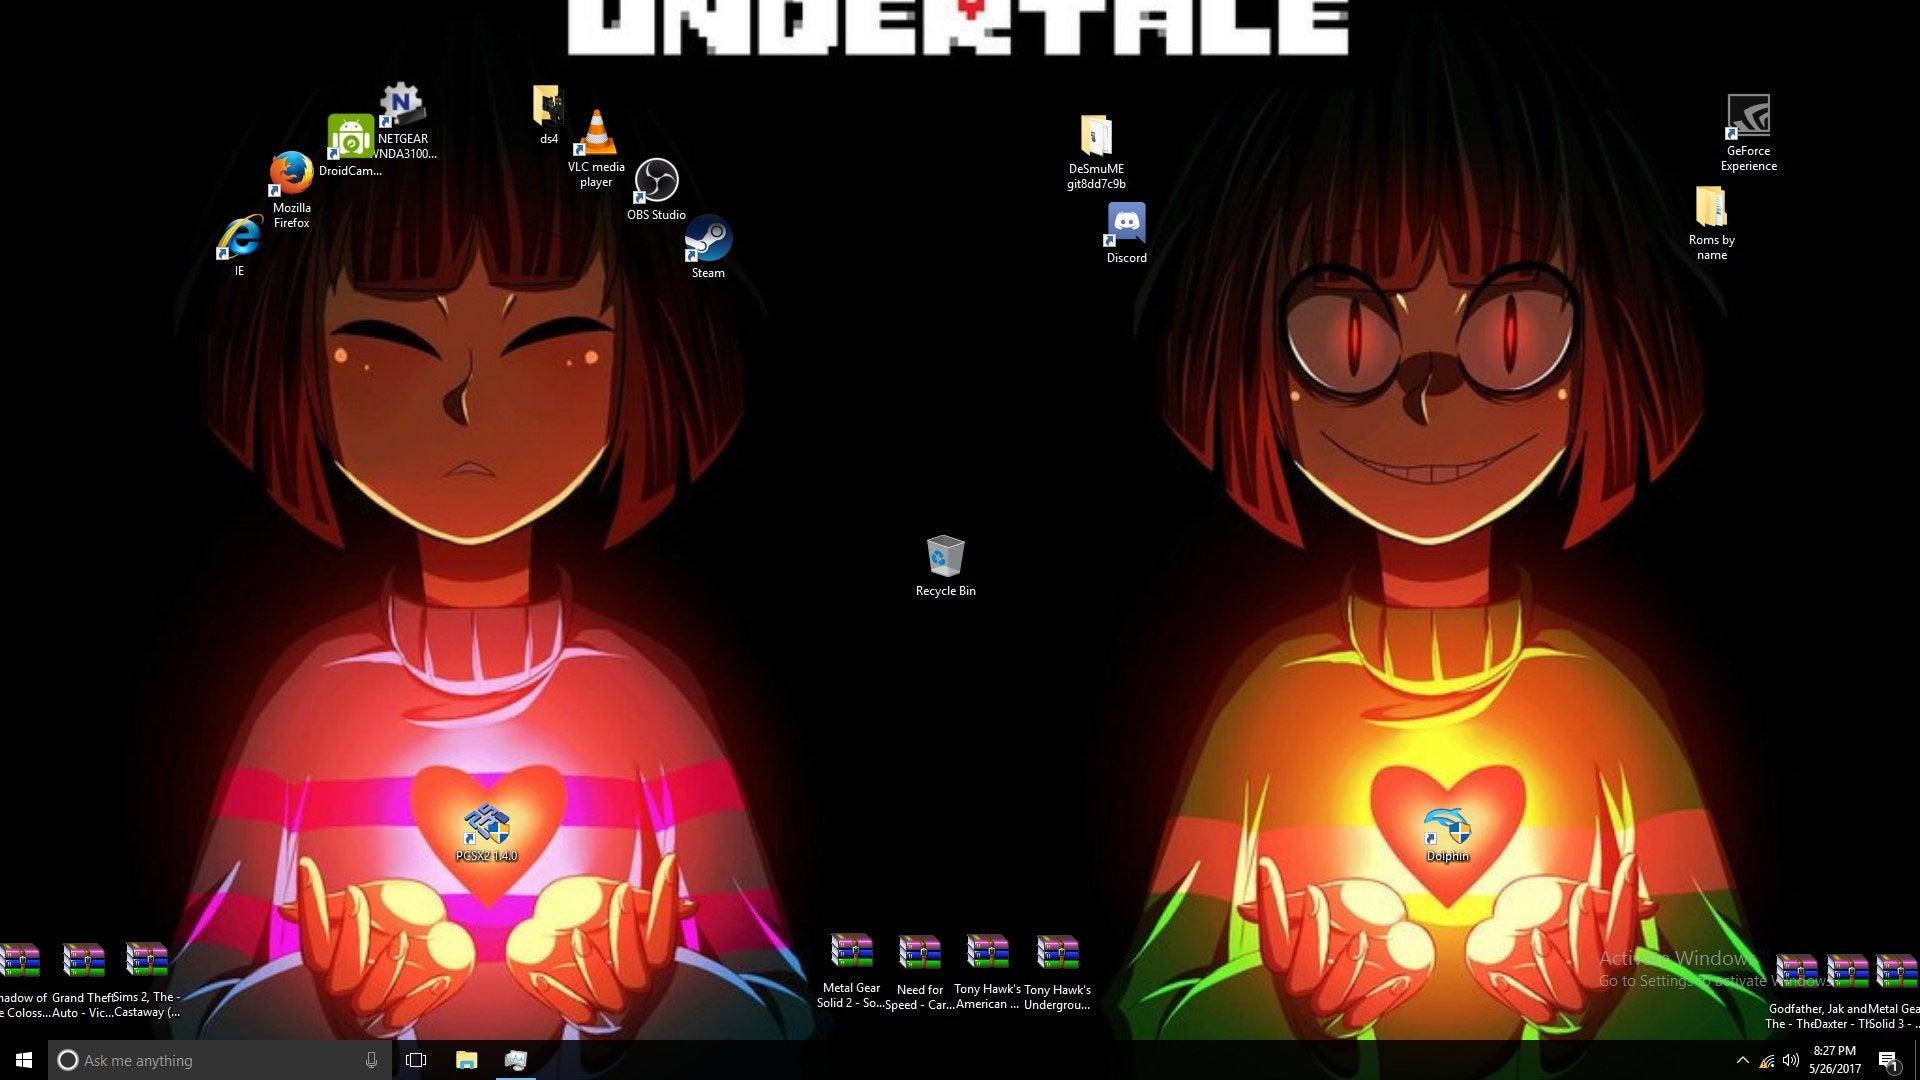 Frisk Chara Desktop Wallpaper with Icon arranged to match